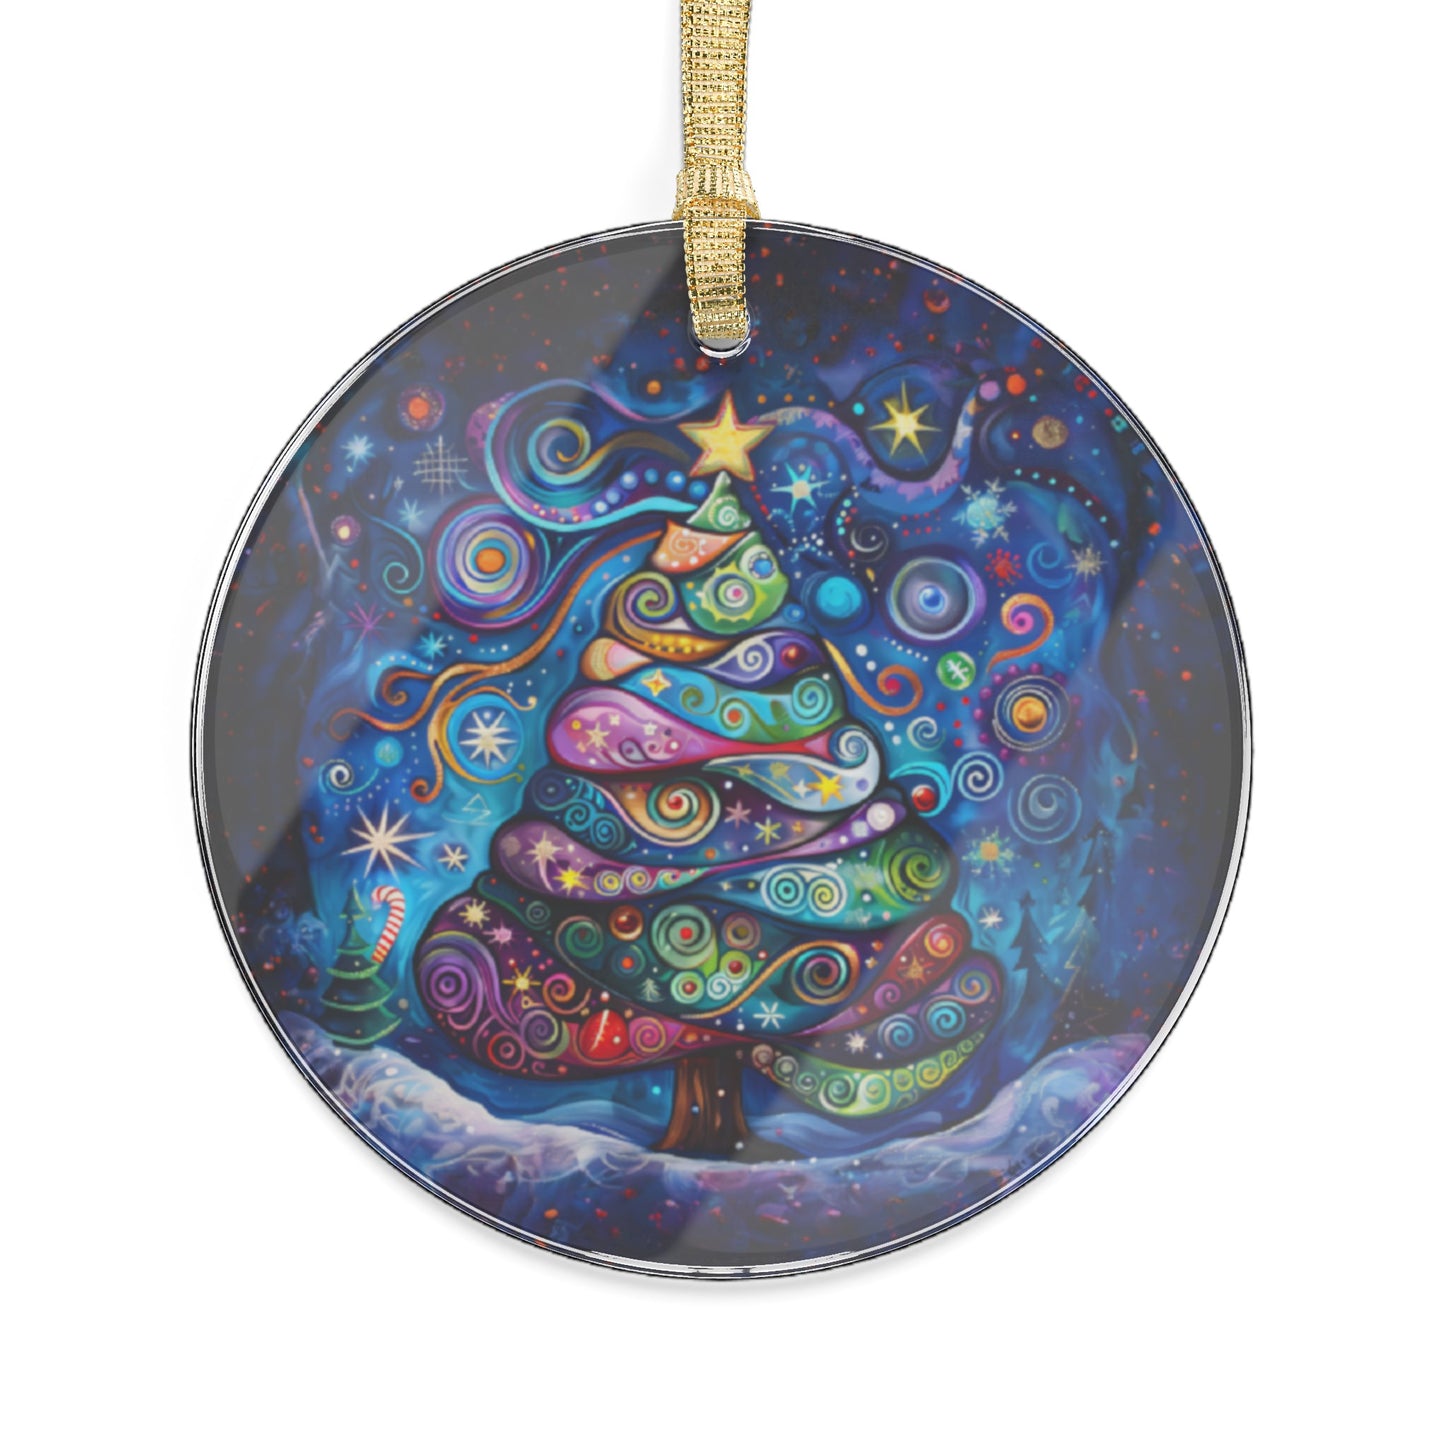 Vibrant Abstract Patchwork Christmas Tree Illuminating the Season Acrylic Ornaments 1, 5, 10, 25, and 50 pieces